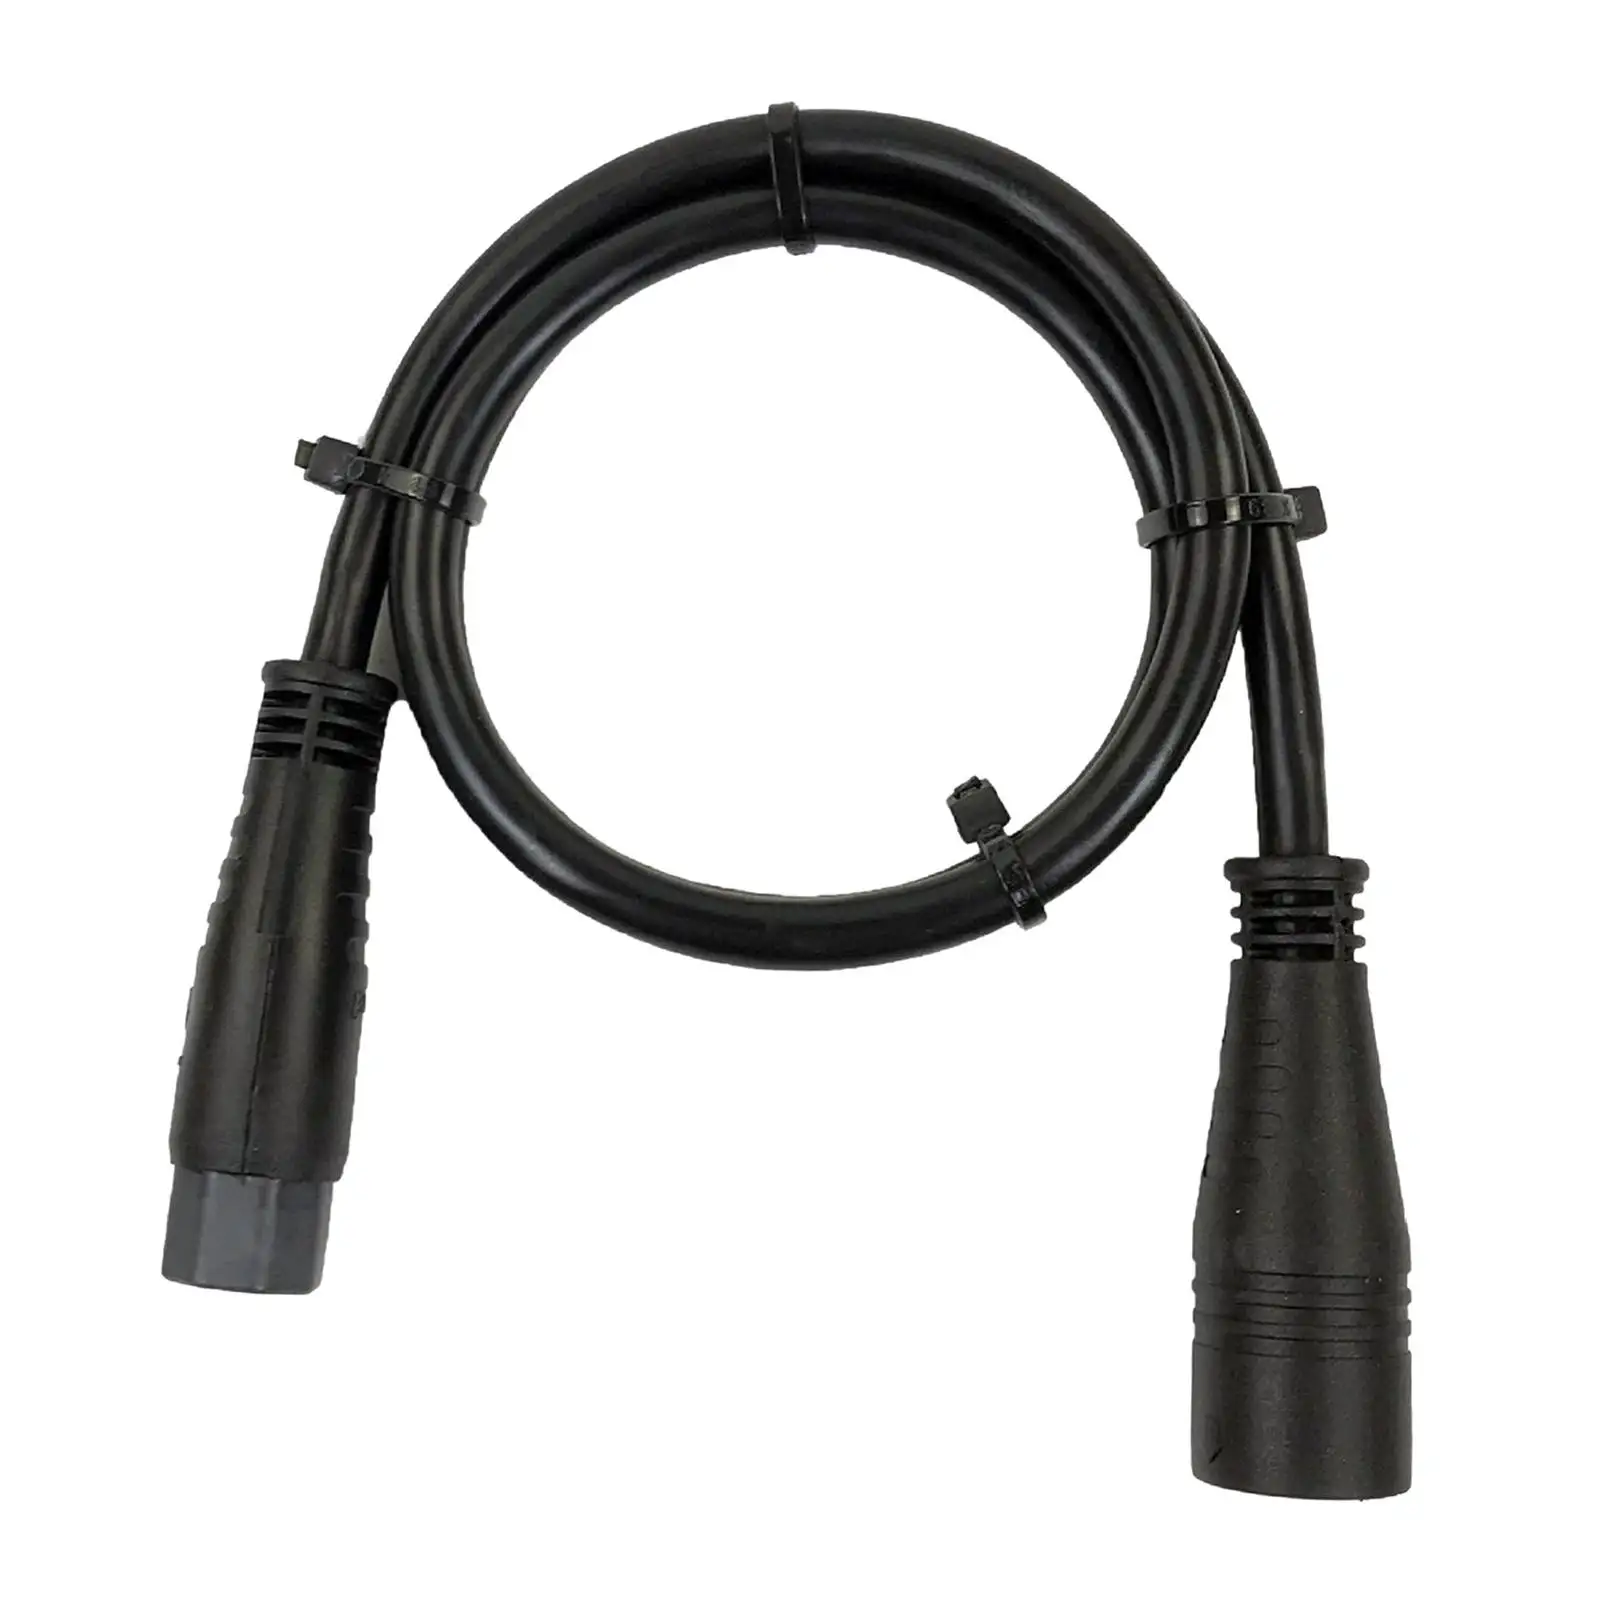 3-Pin Motor Extension Cable Female to Male 60cm Electric Bike Motor Cables for E Bike Electric Bicycle Accessories 1000W Motor